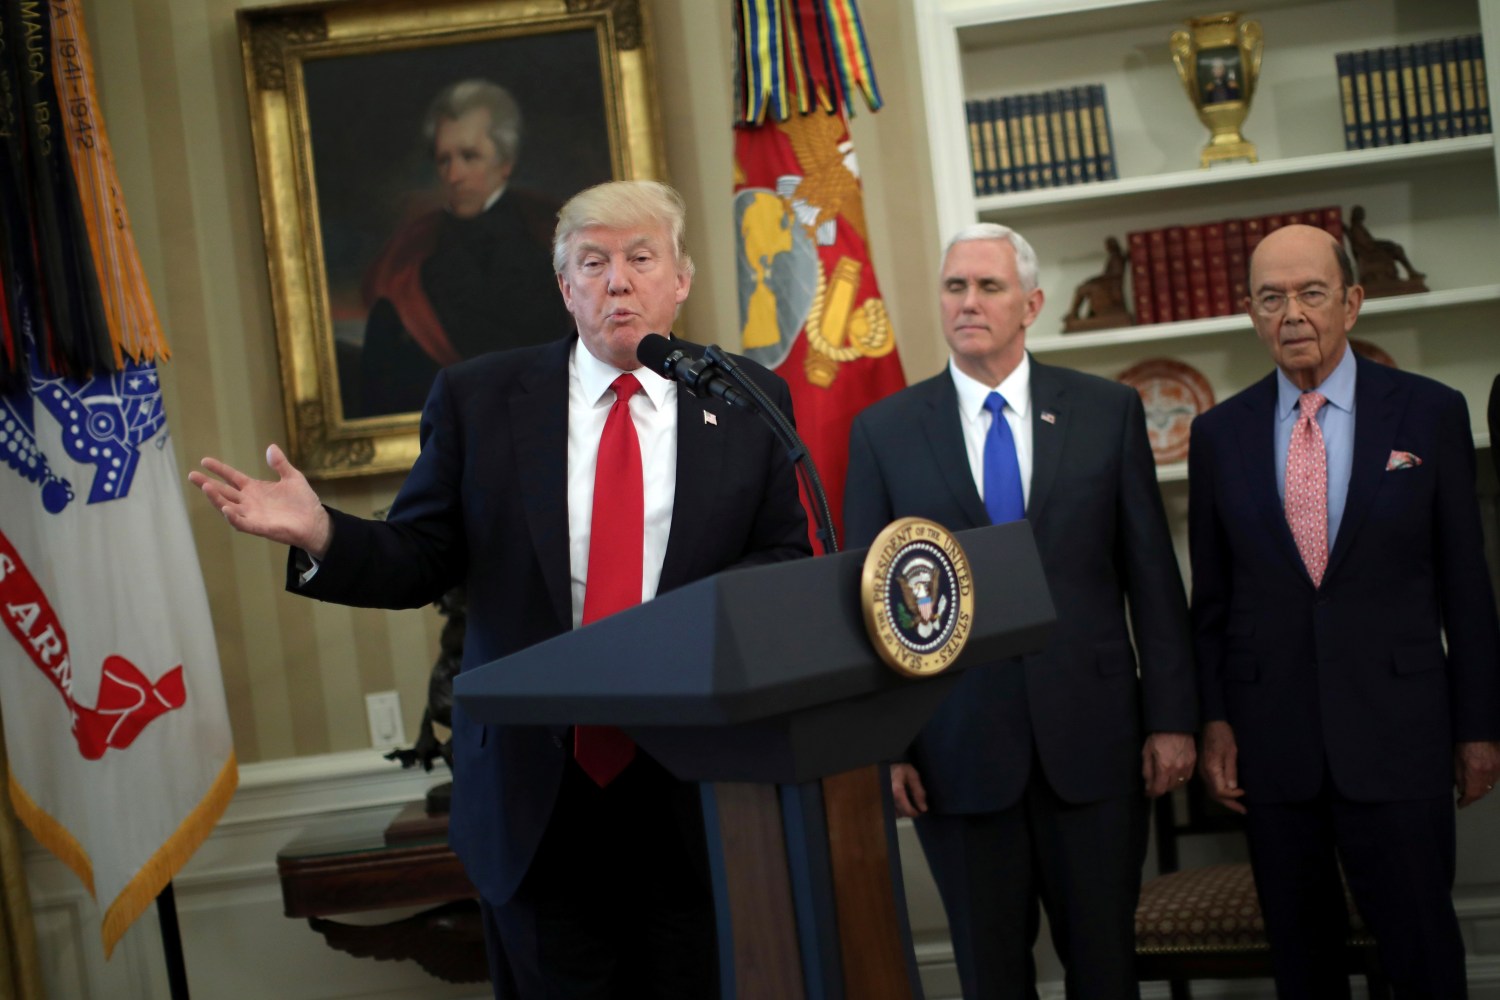 U.S. President Donald Trump speaks during a signing ceremony of executive orders on trade, accompanied by Vice President Mike Pence (C) and U.S. Commerce Secretary Wilbur Ross (R) at the Oval Office of the White House in Washington, U.S., March 31, 2017. REUTERS/Carlos Barria - RTX33KXG